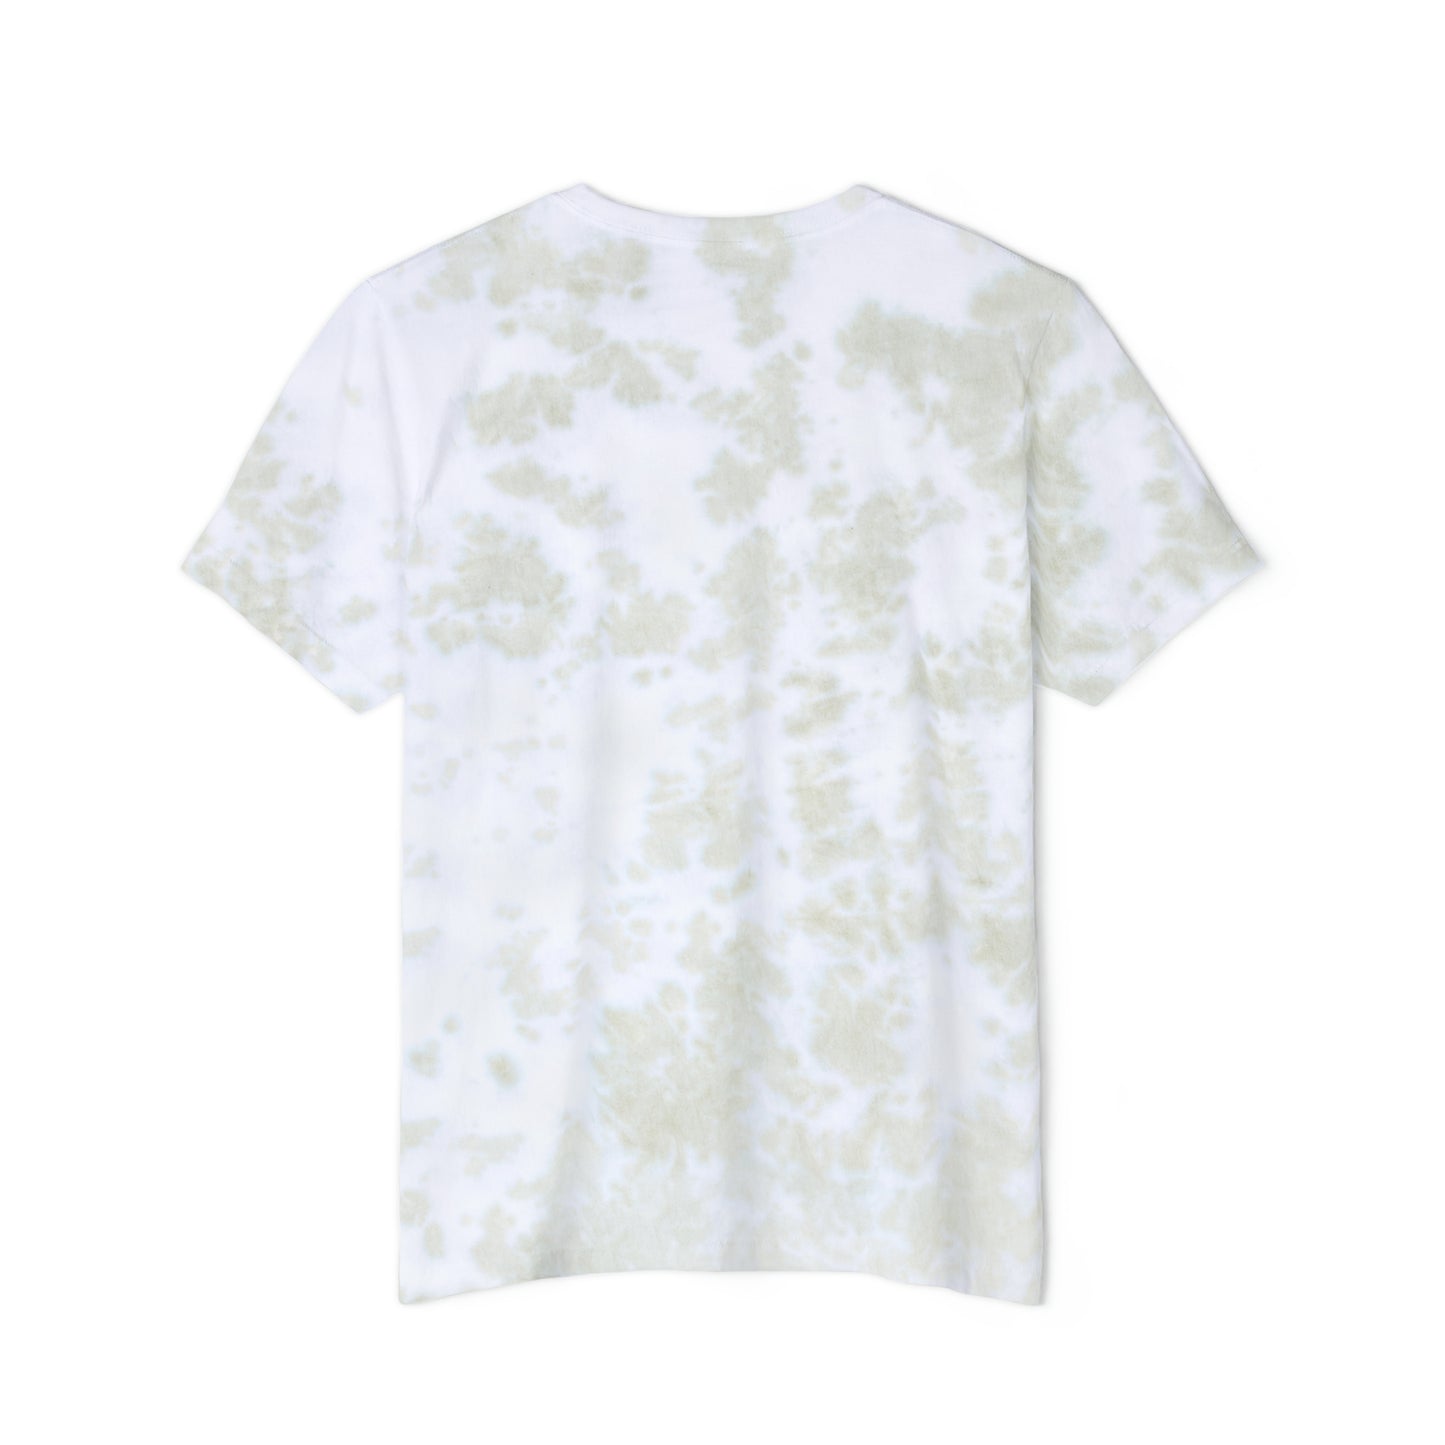 Sea Lion Tie-Dyed T-Shirt